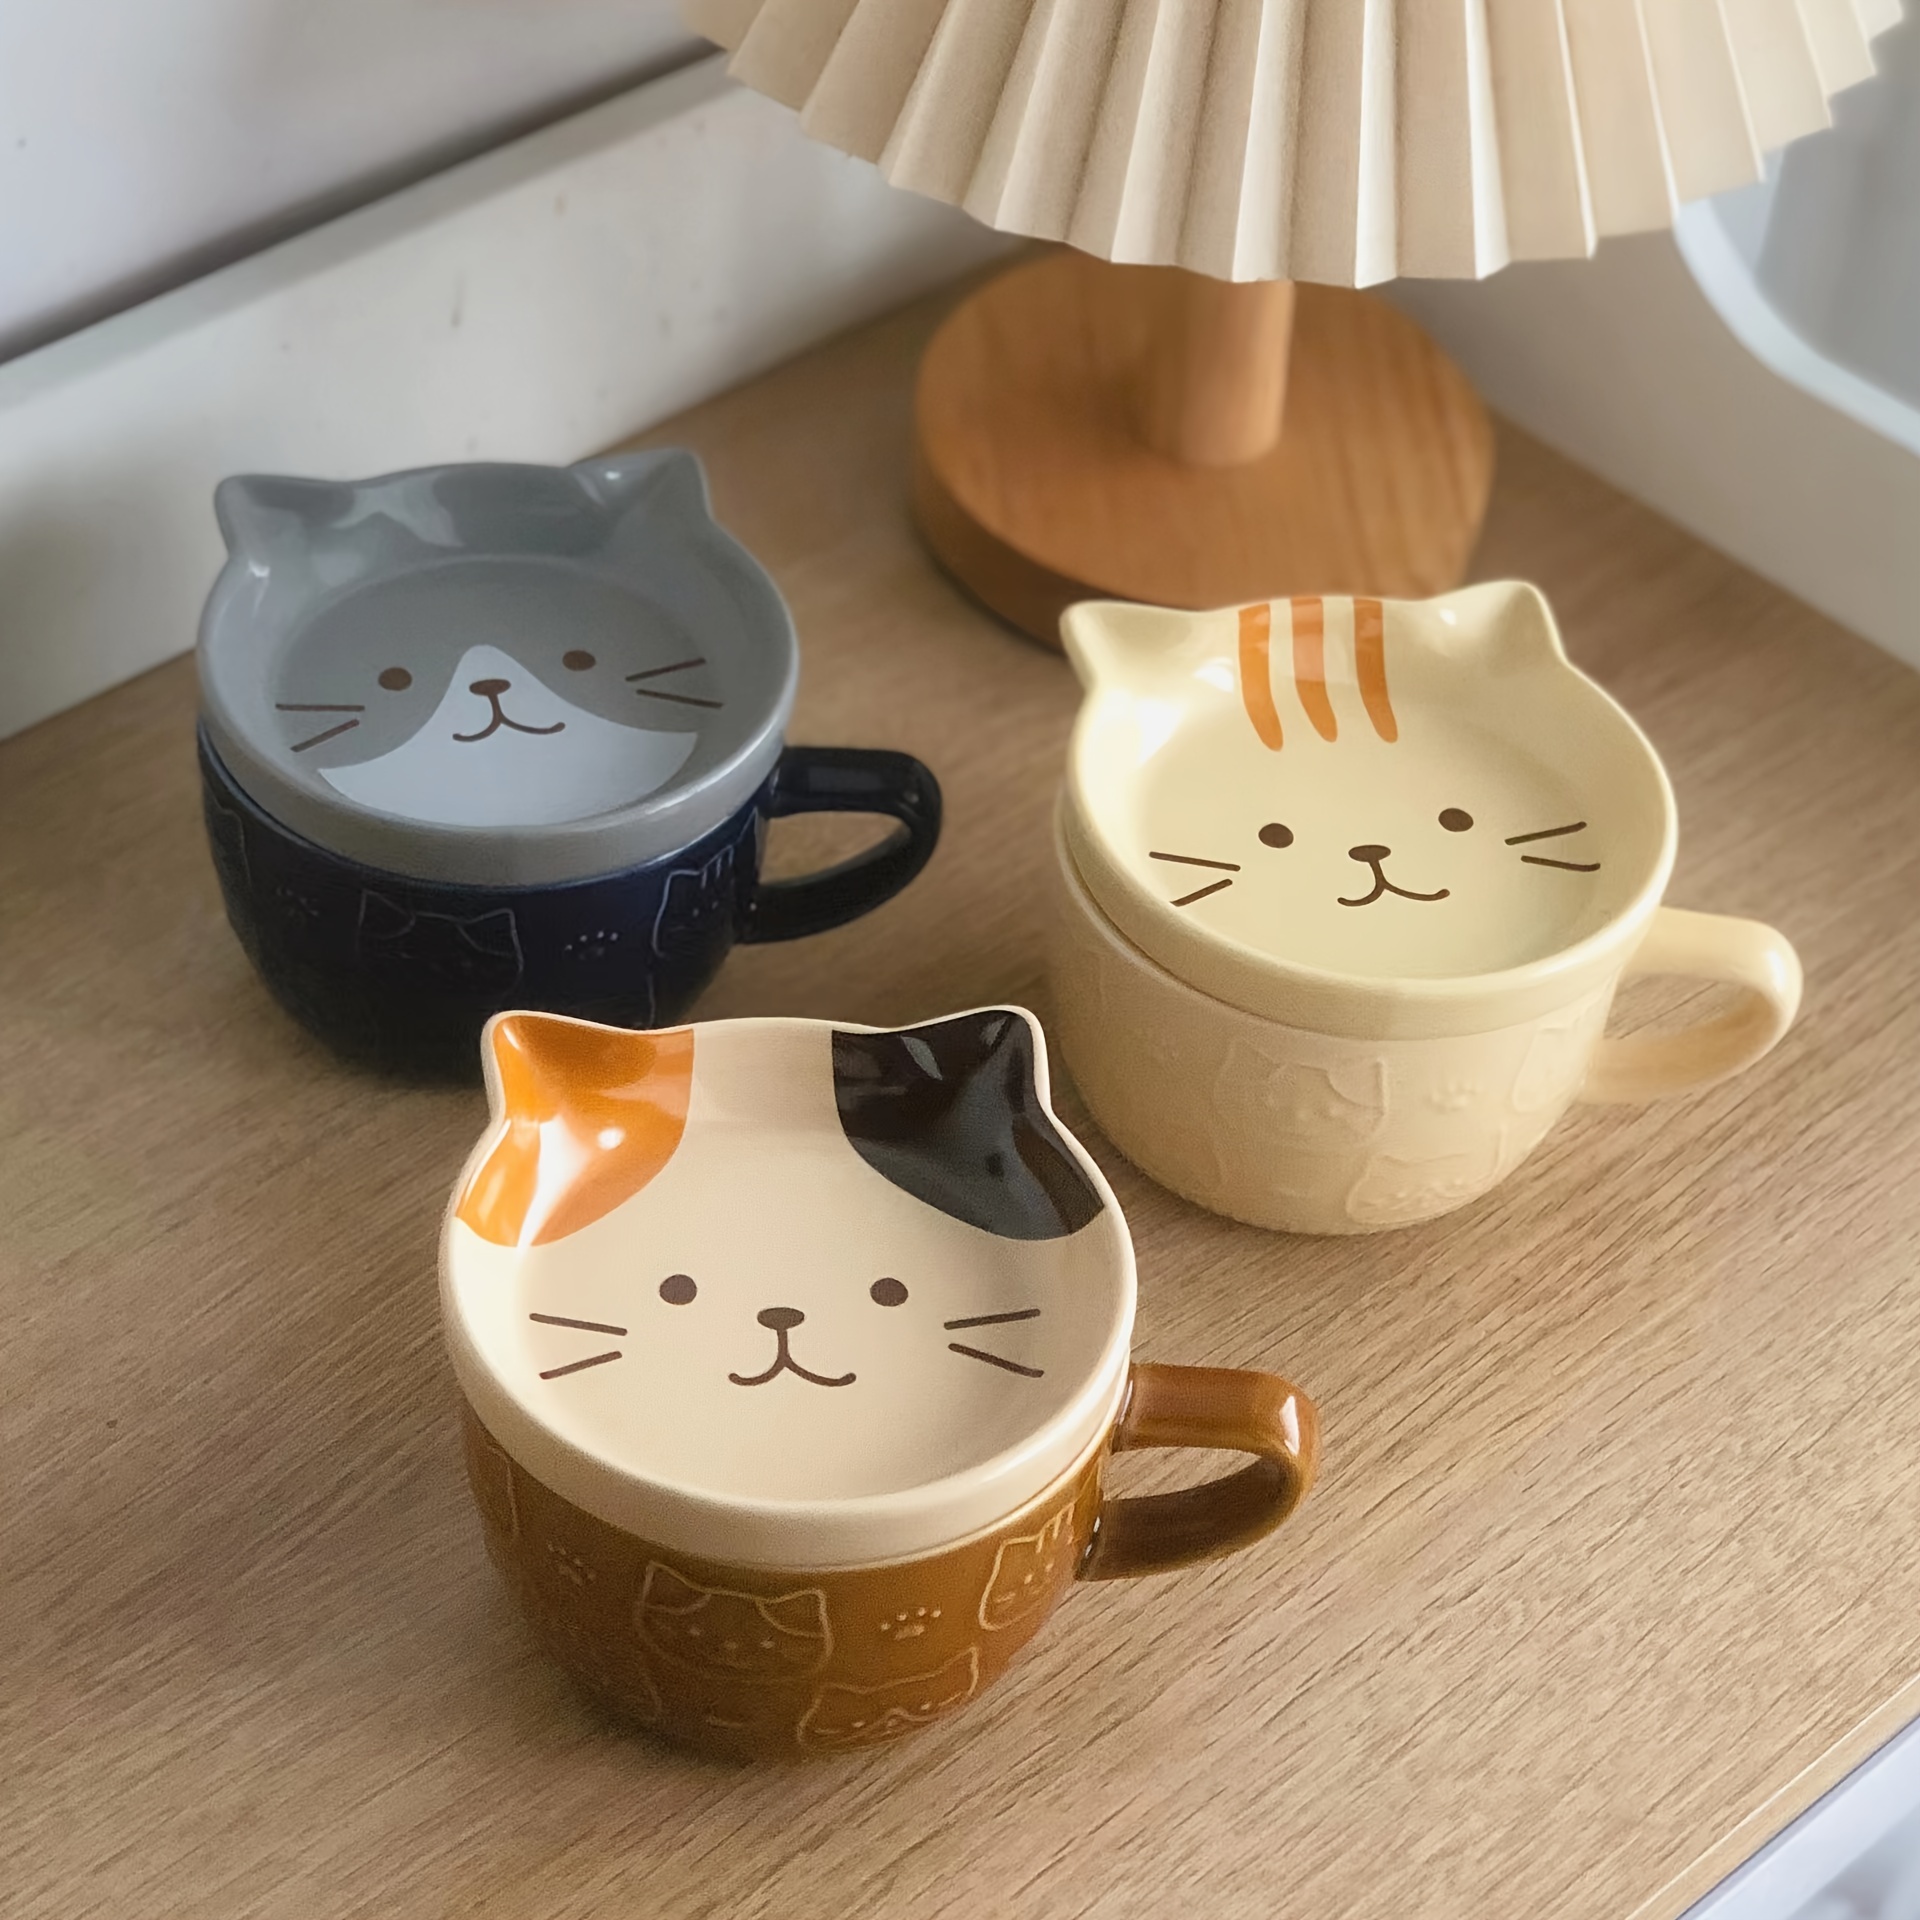 1pc Cute Ceramic Cat Mugs With Lids Or Coaster Novelty Lovely